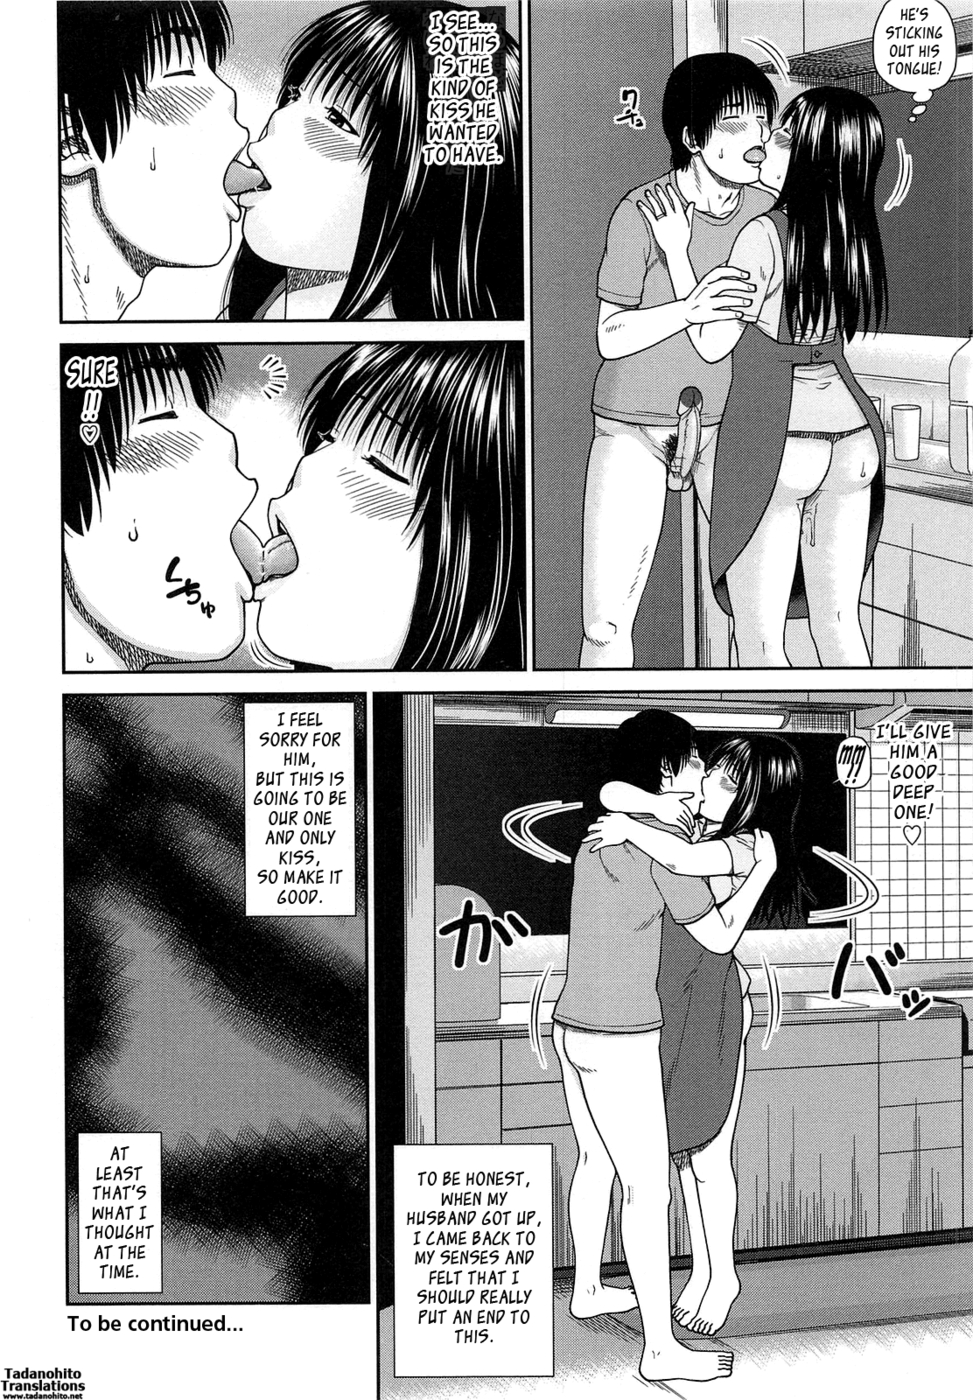 Oldmomsonsex - 35 Year Old Ripe Wife-Chapter 5-The Night I Was Aroused By My Son's Friend  (First Half)-Hentai Manga Hentai Comic - Page: 20 - Online porn video at  mobile